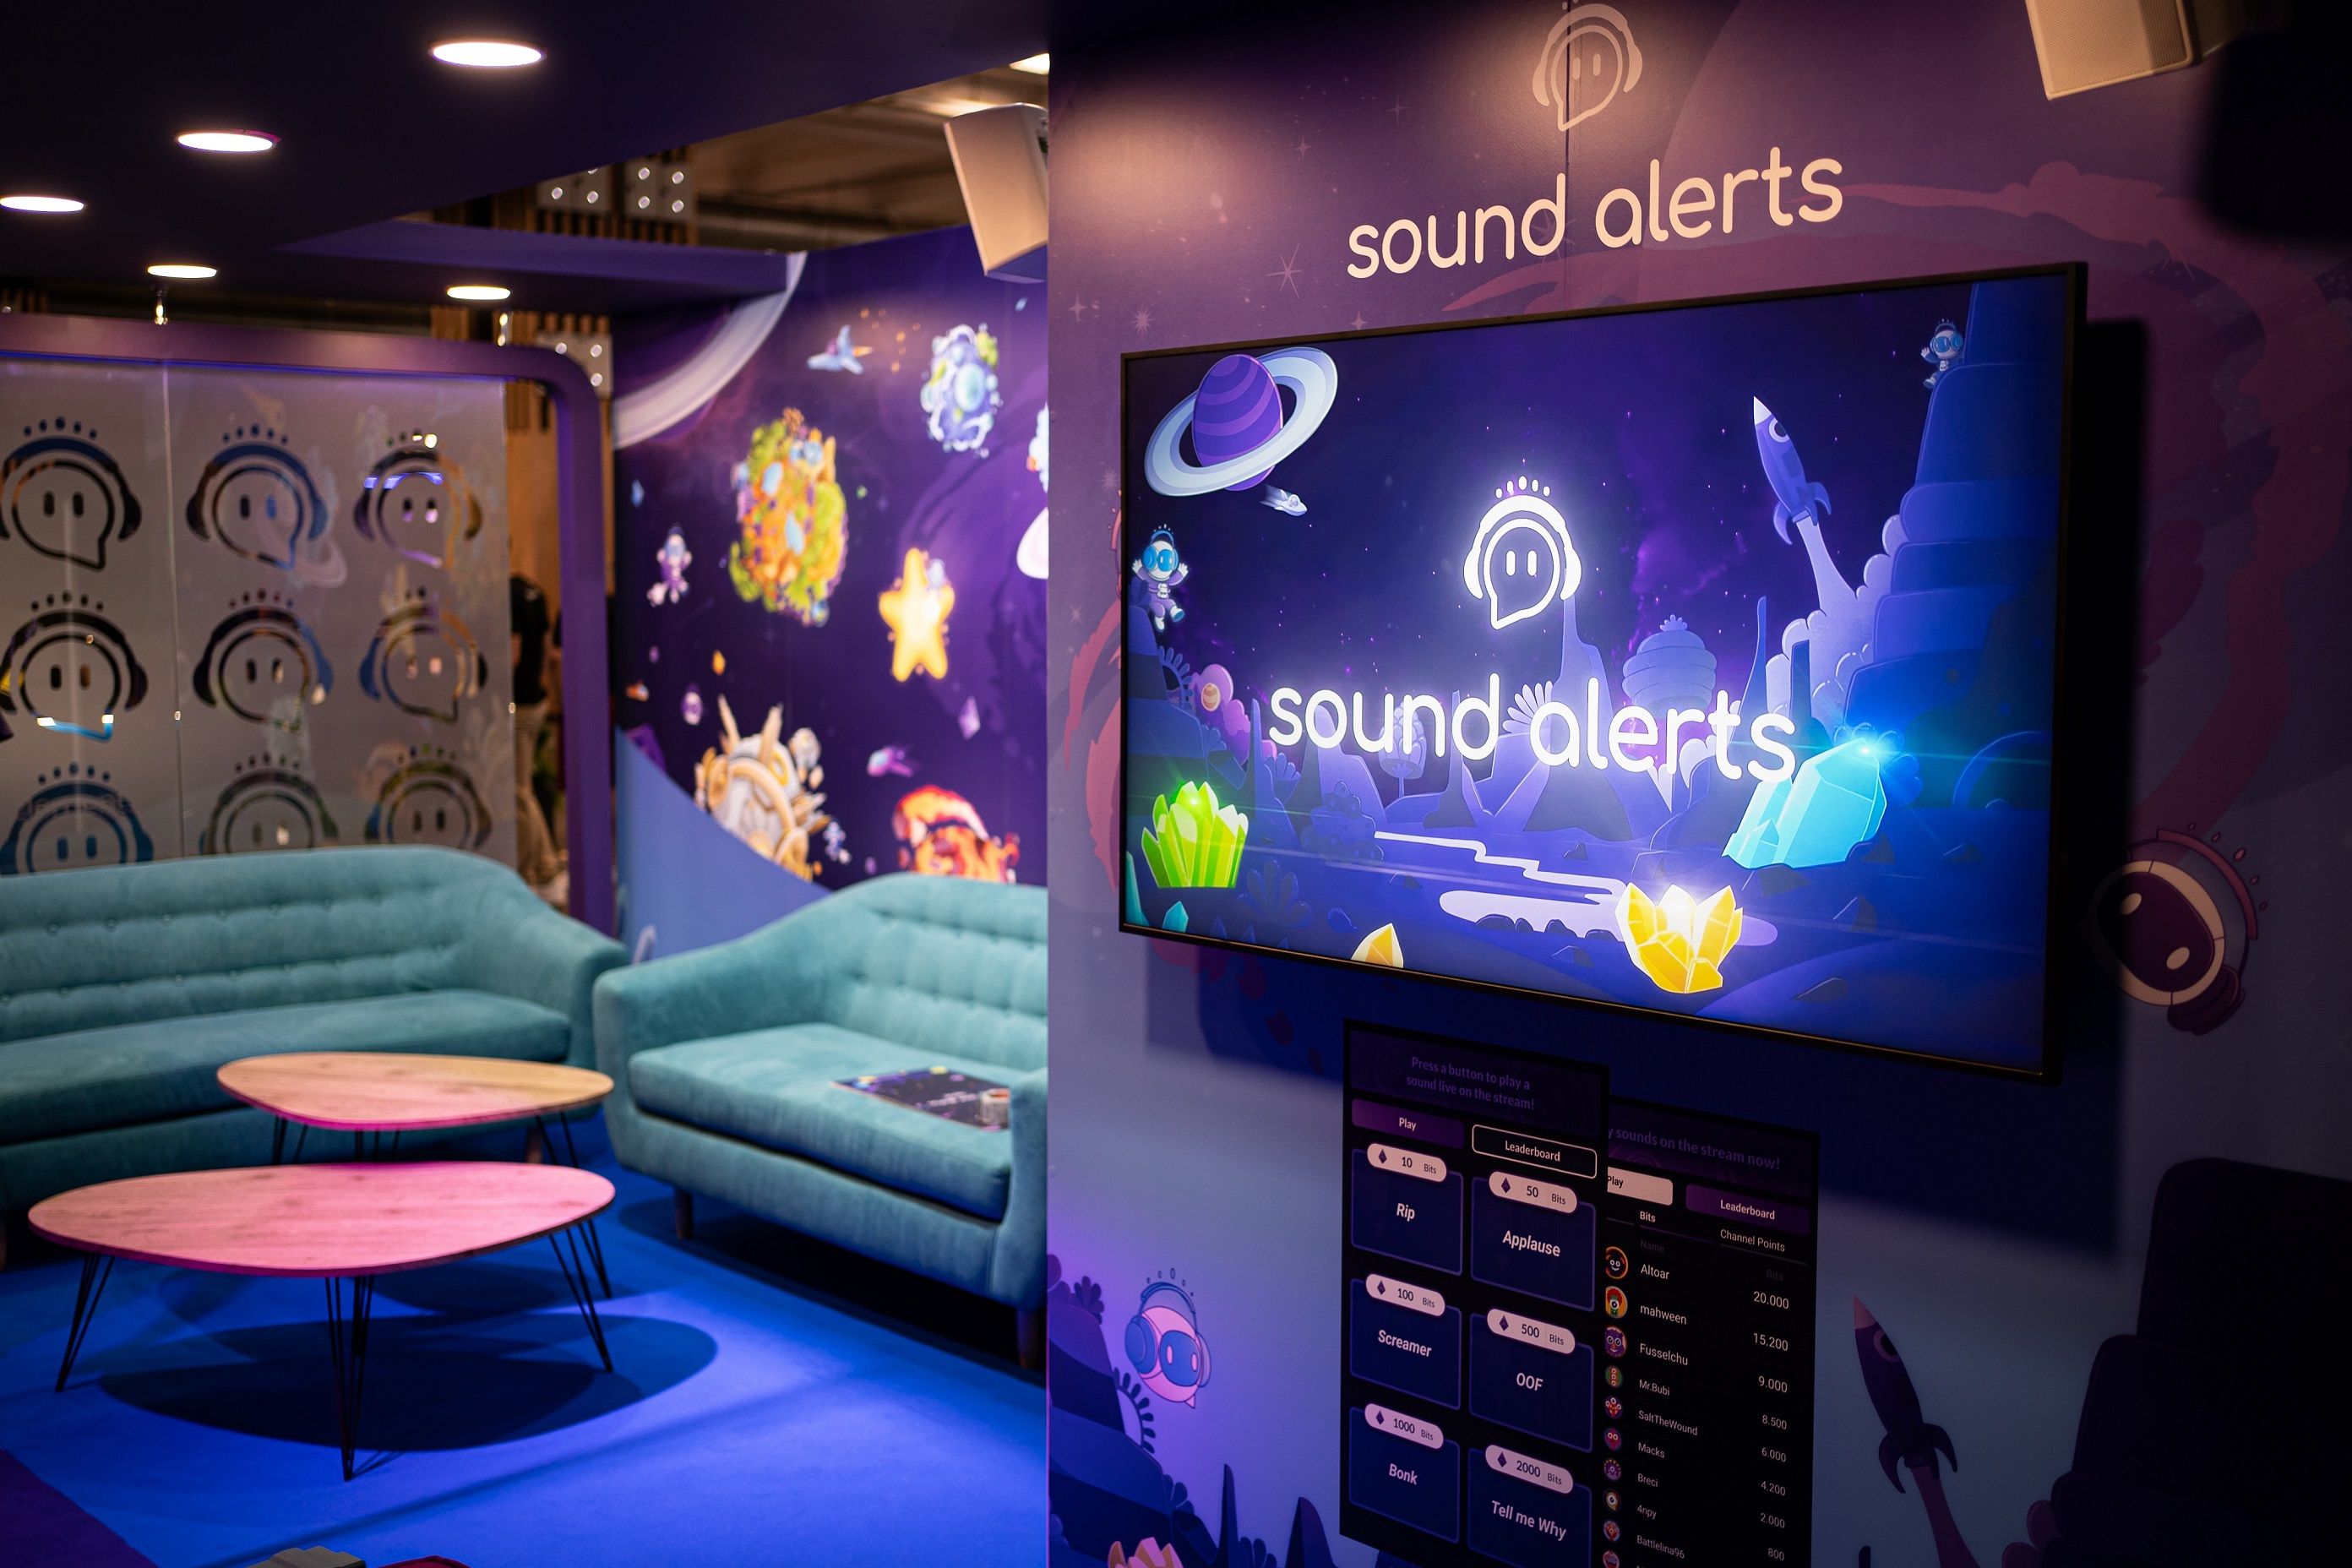 This image shows the inside of the Sound Alerts booth at TwitchCon Paris